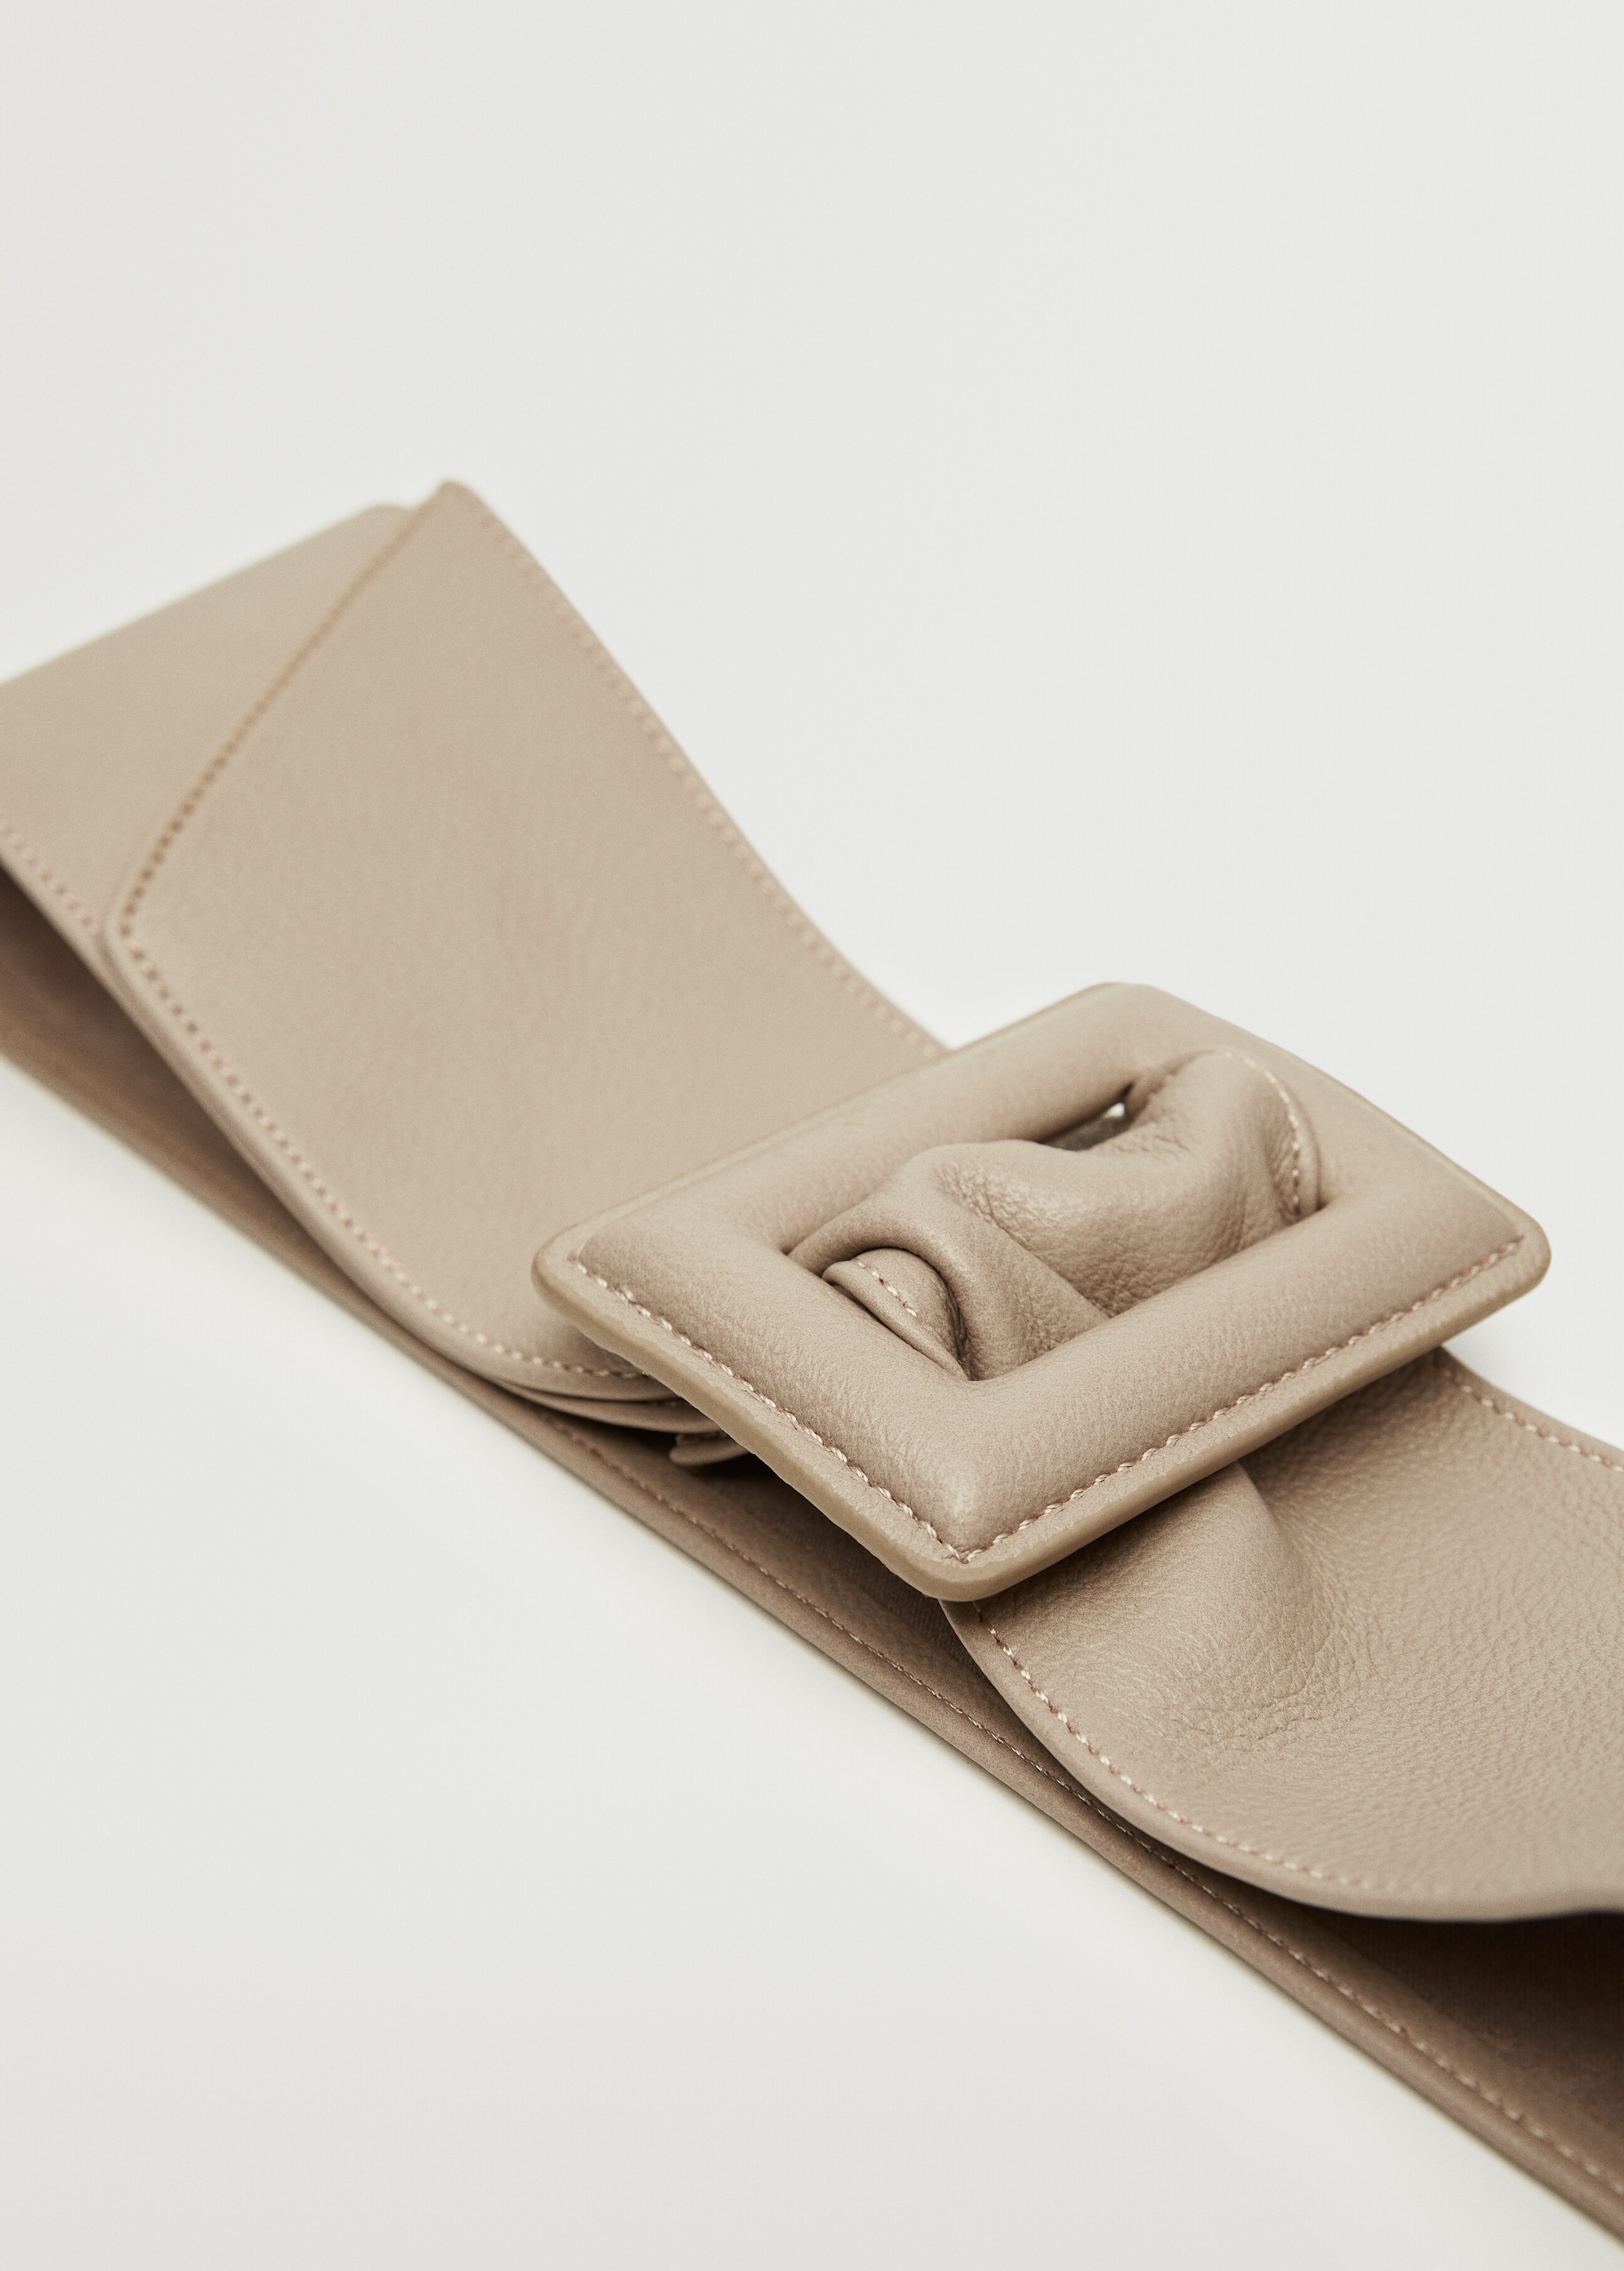 Faux-leather belt - Details of the article 2